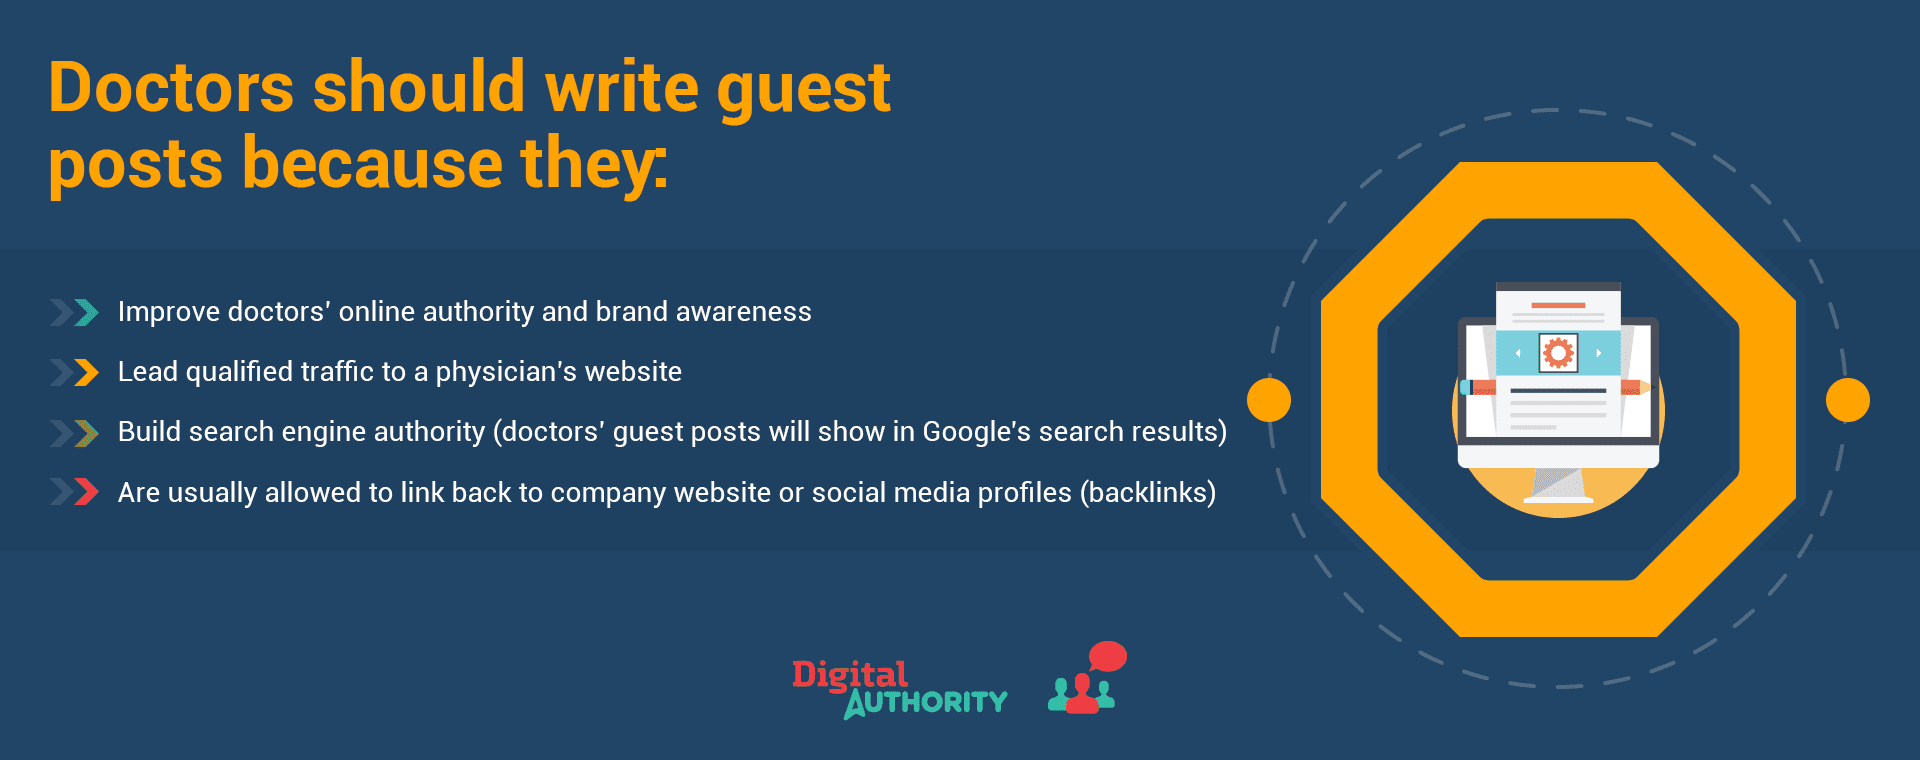 Graphic explaining why doctors should write guest posts 